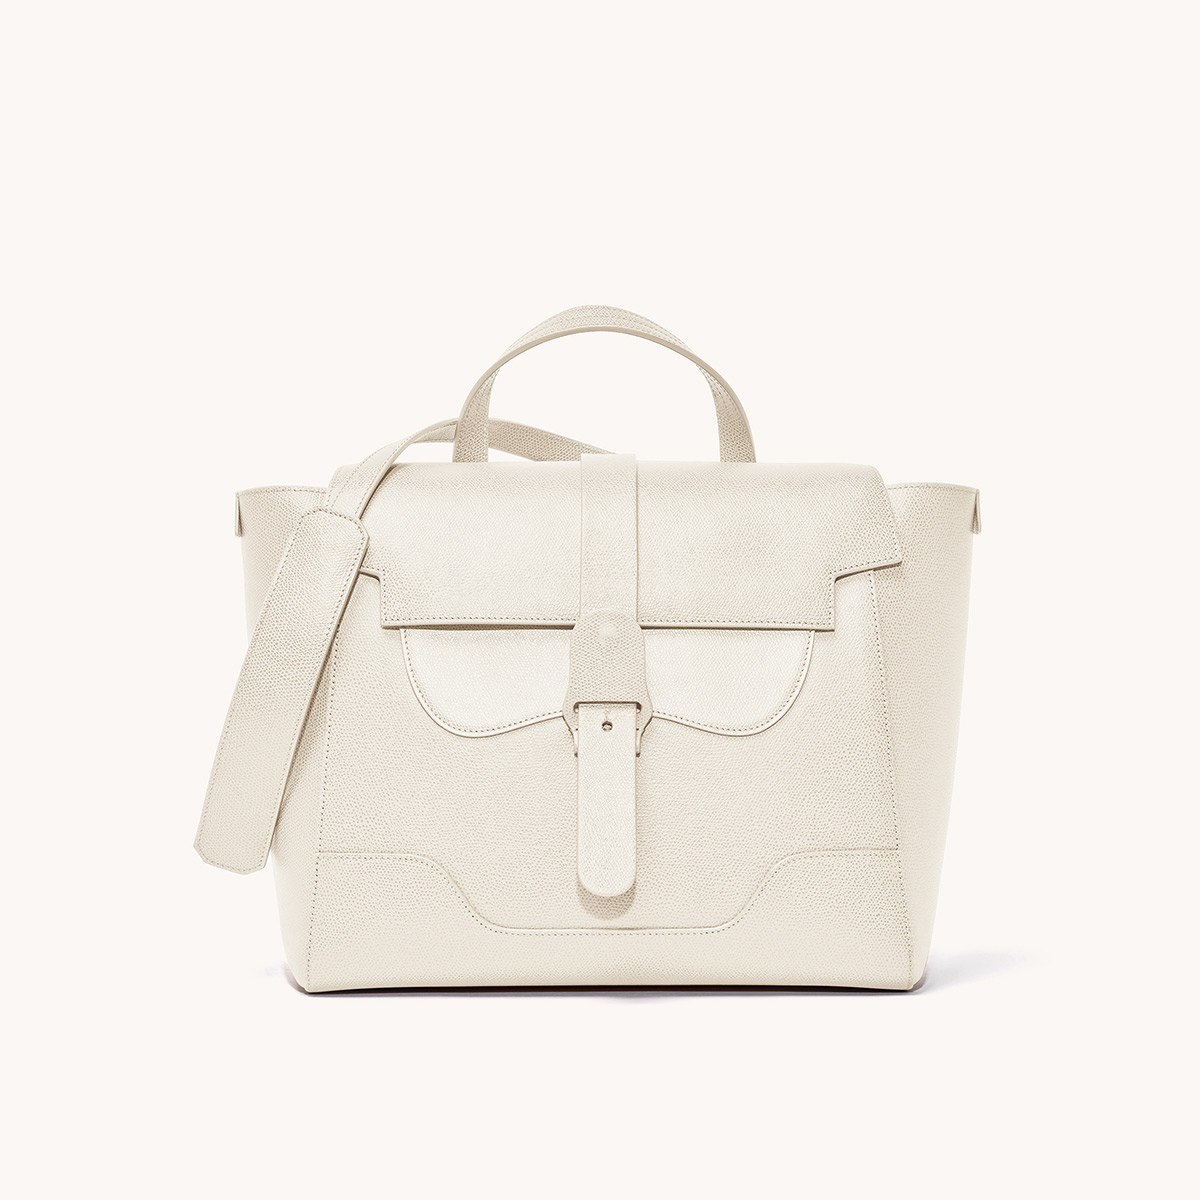 Maestra Bag Pebbled Cream with Silver Hardware Front View with long strap draped over top